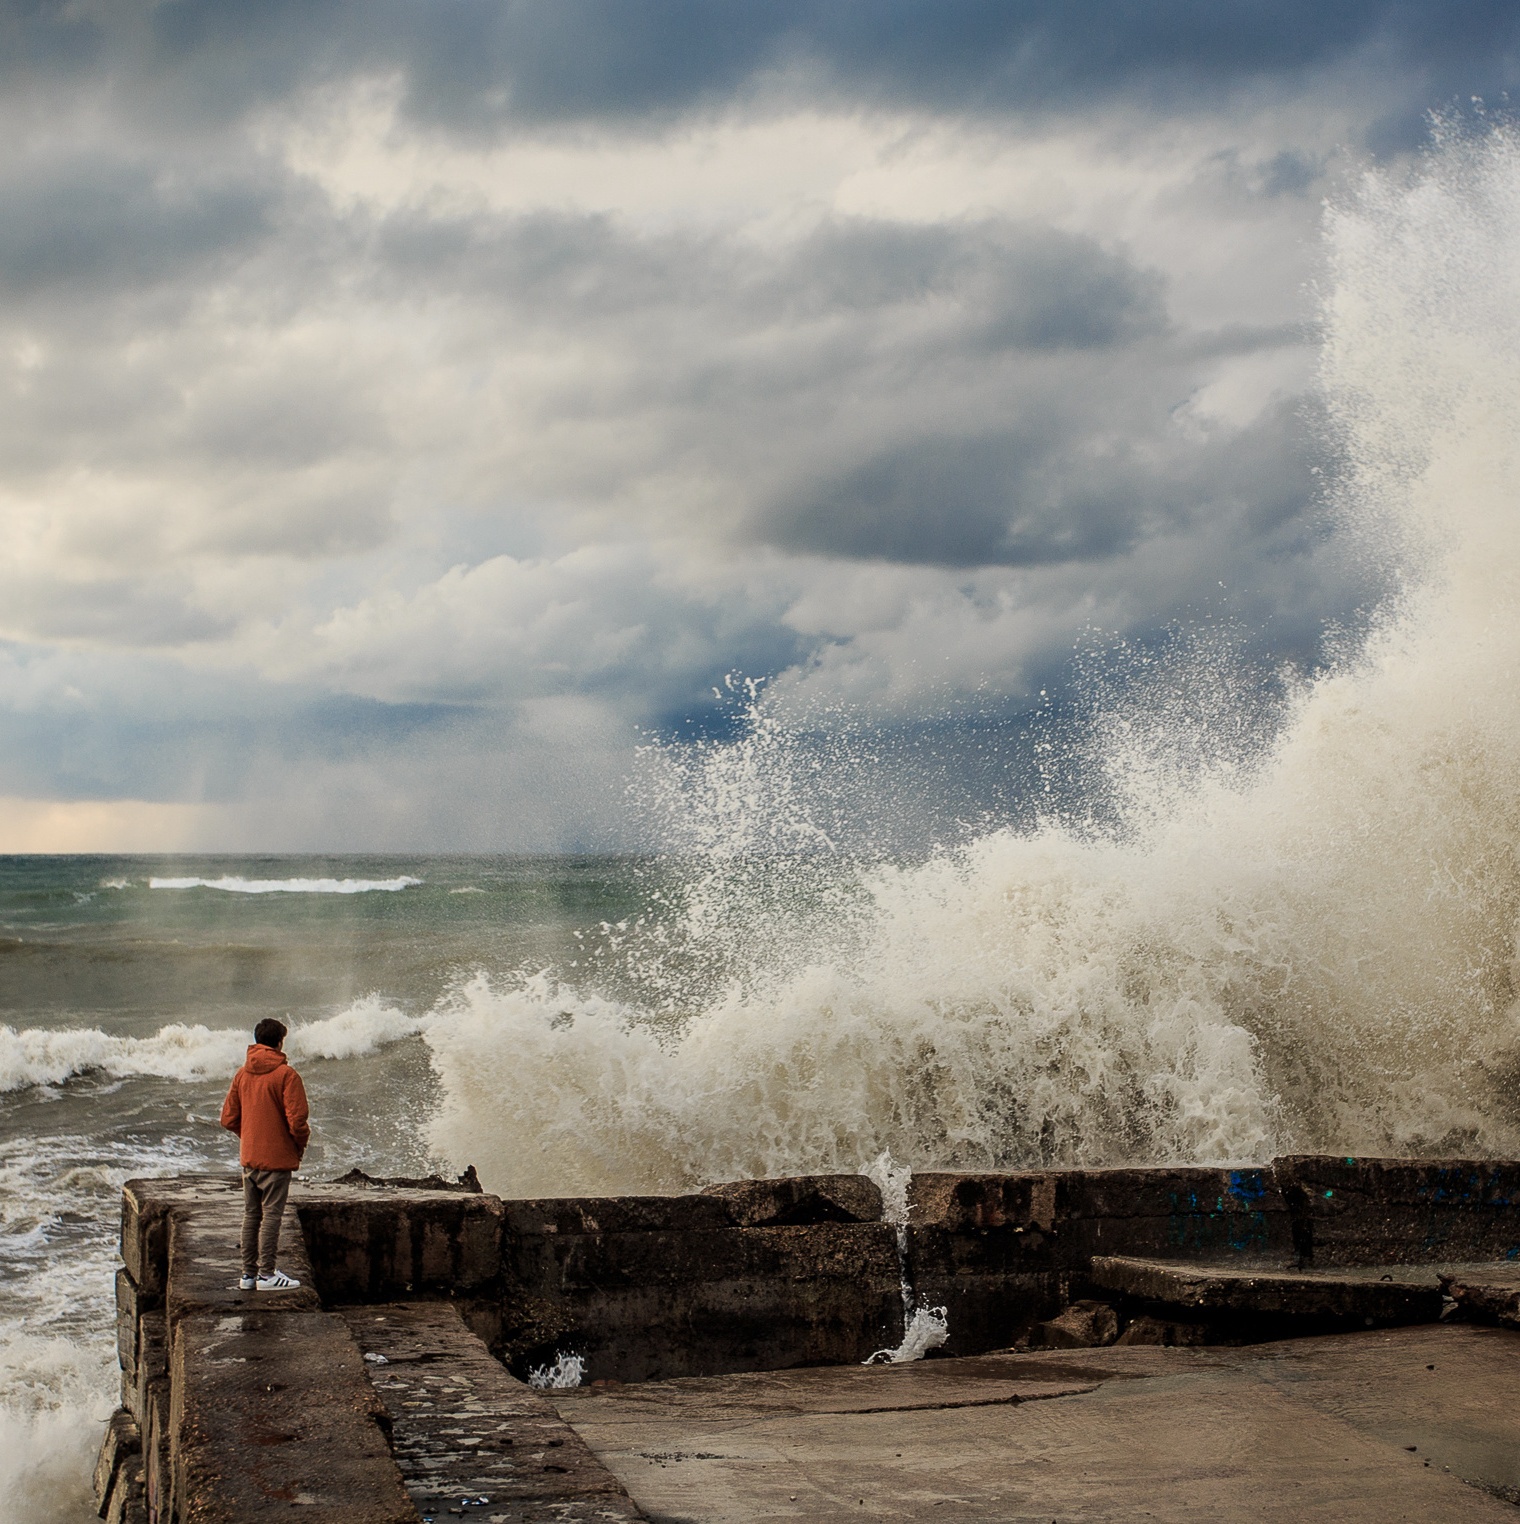 Storm Waves Over A Pier In The Adler, Sochi